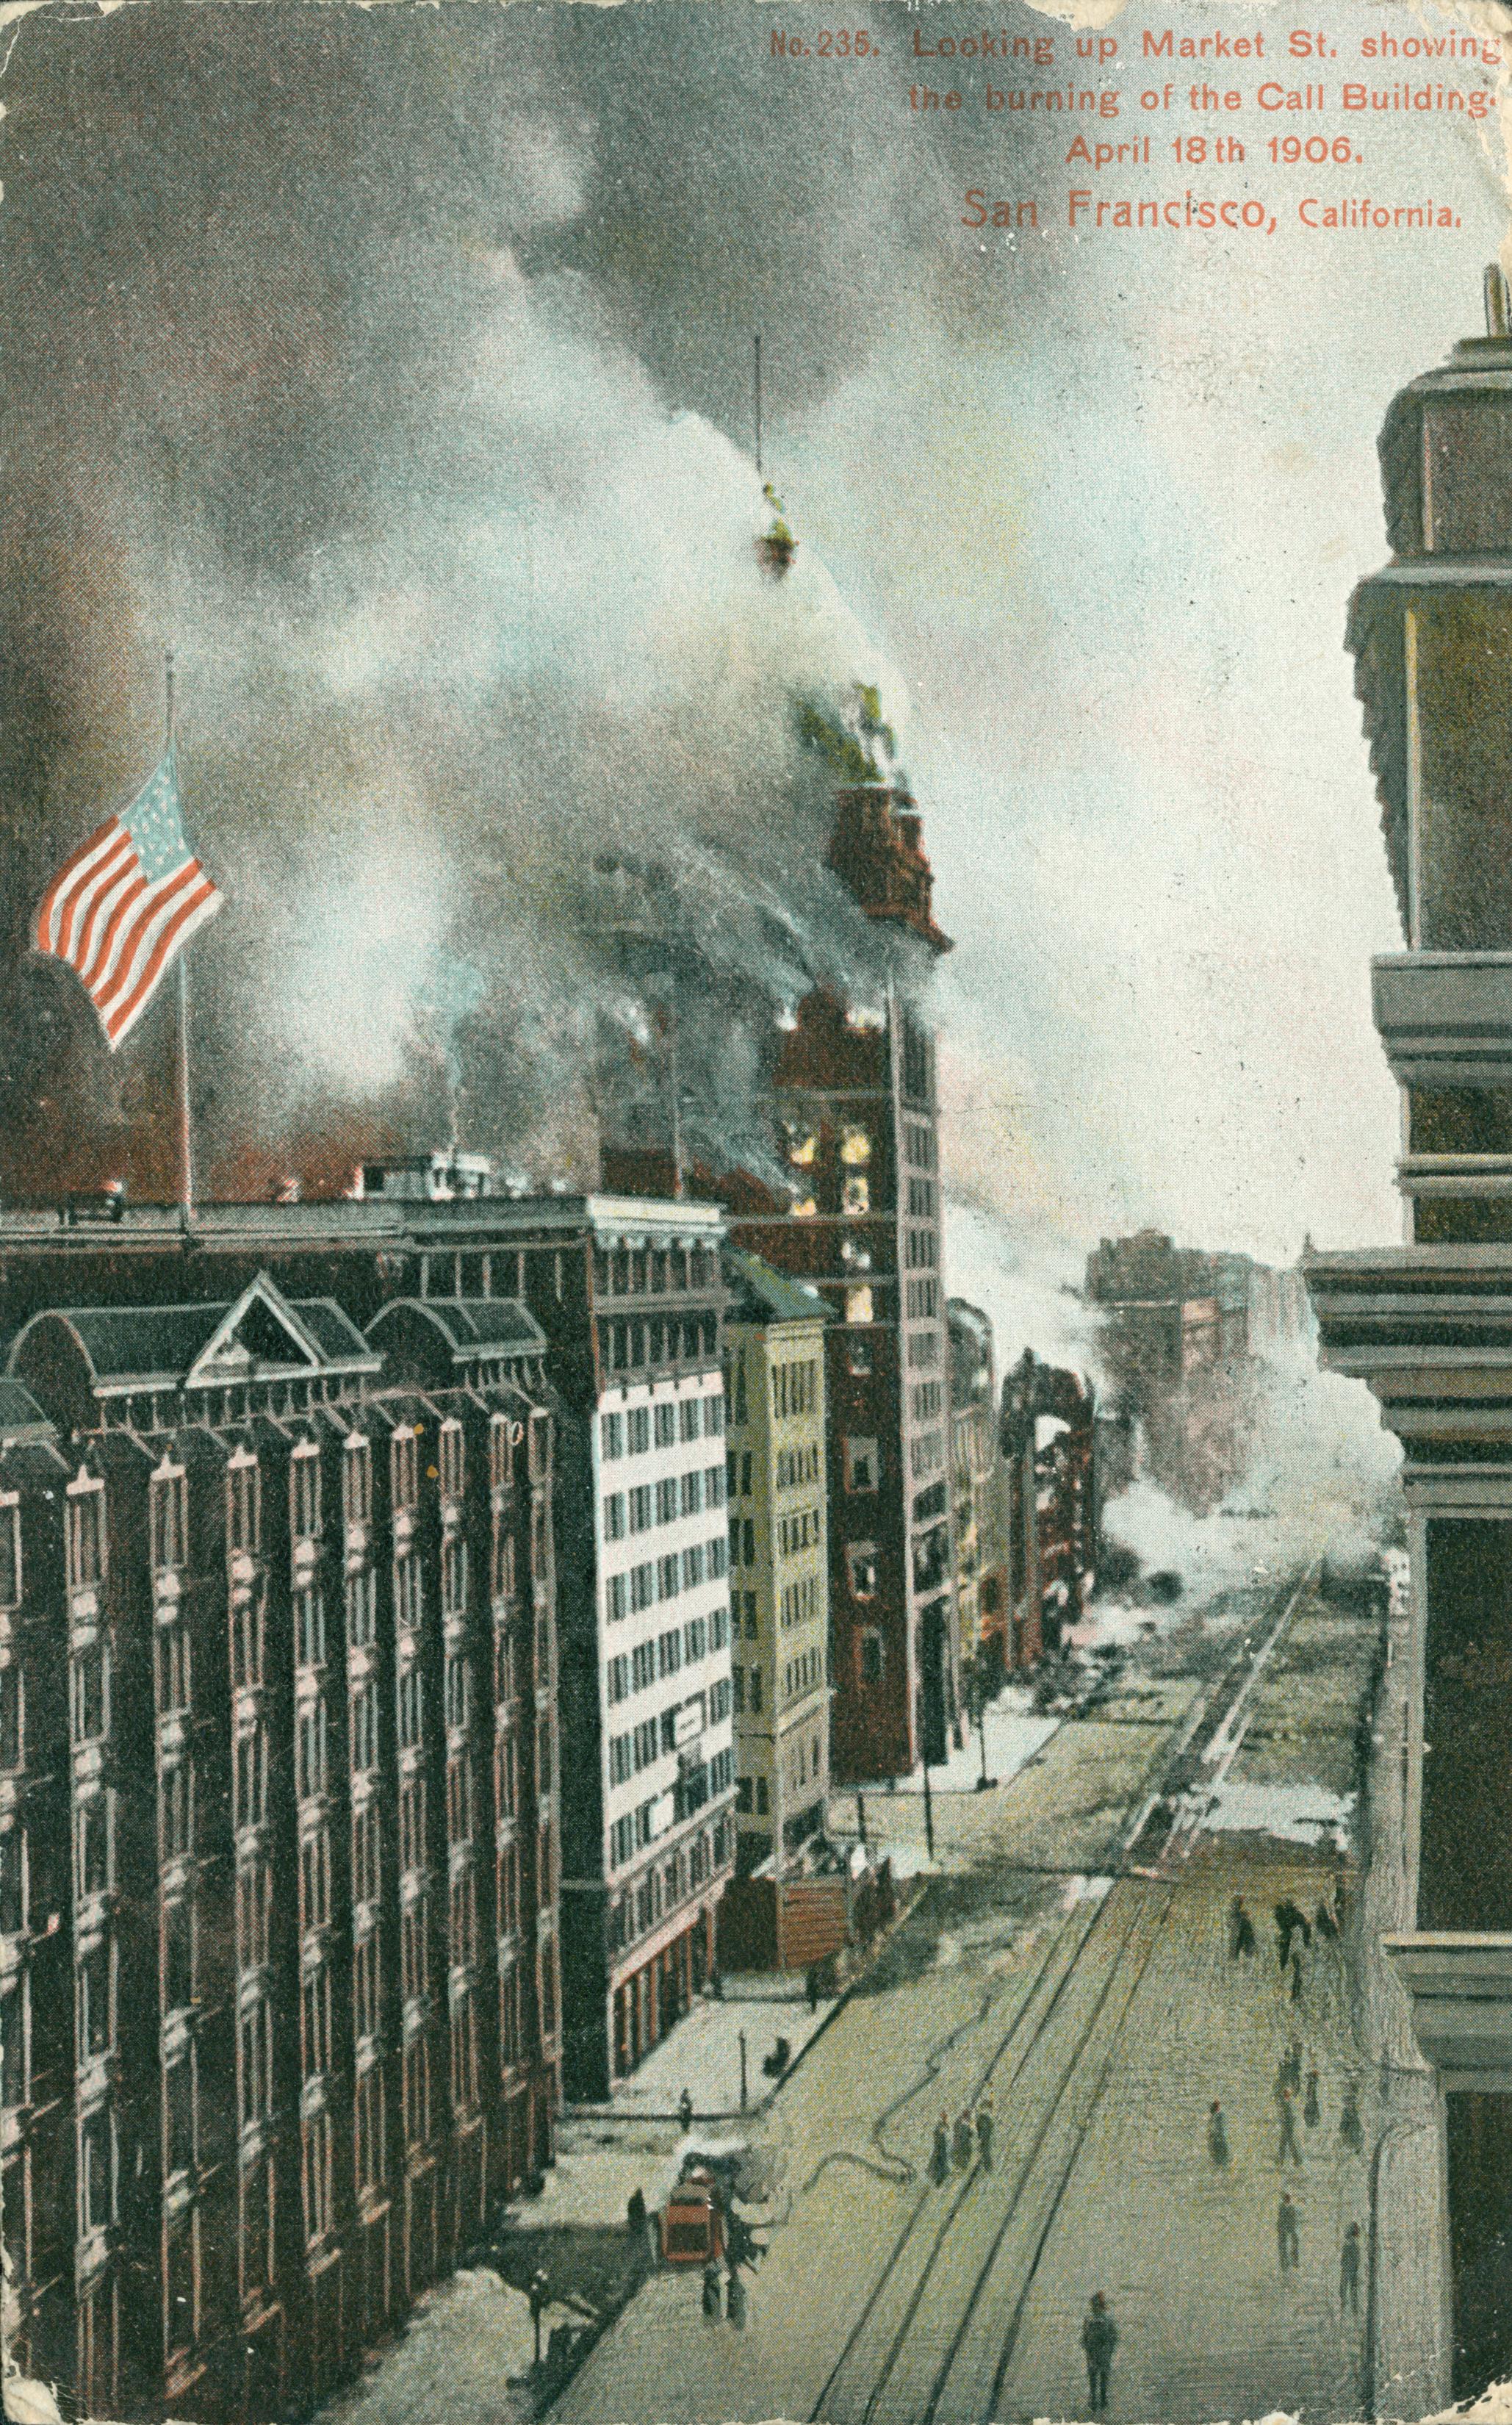 A drawing of Market Street showing the Call Building burning.